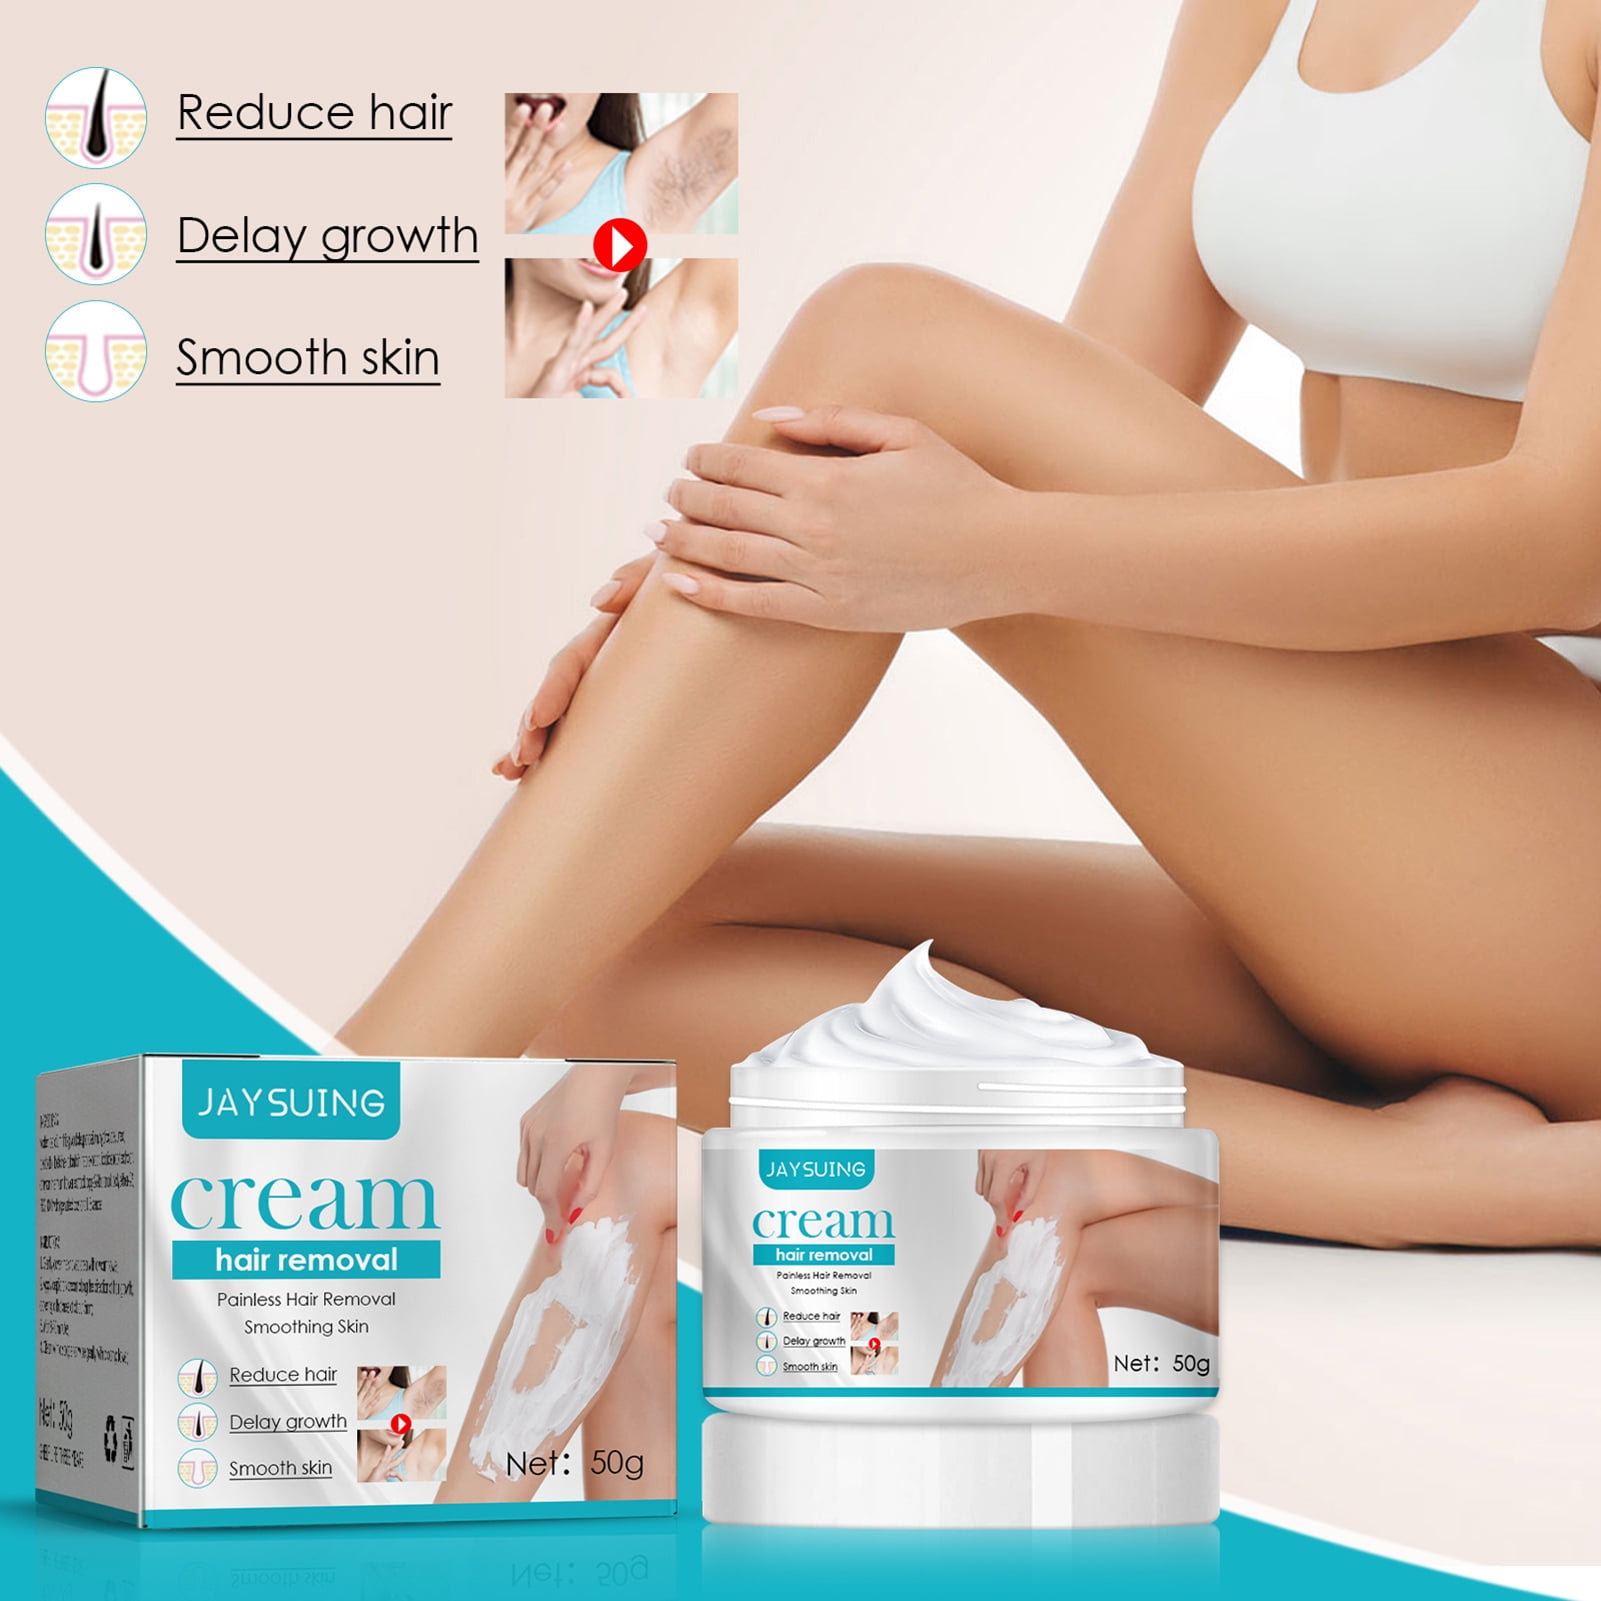 Cheers US 50g Intimate/Private Hair Removal Cream for Women for